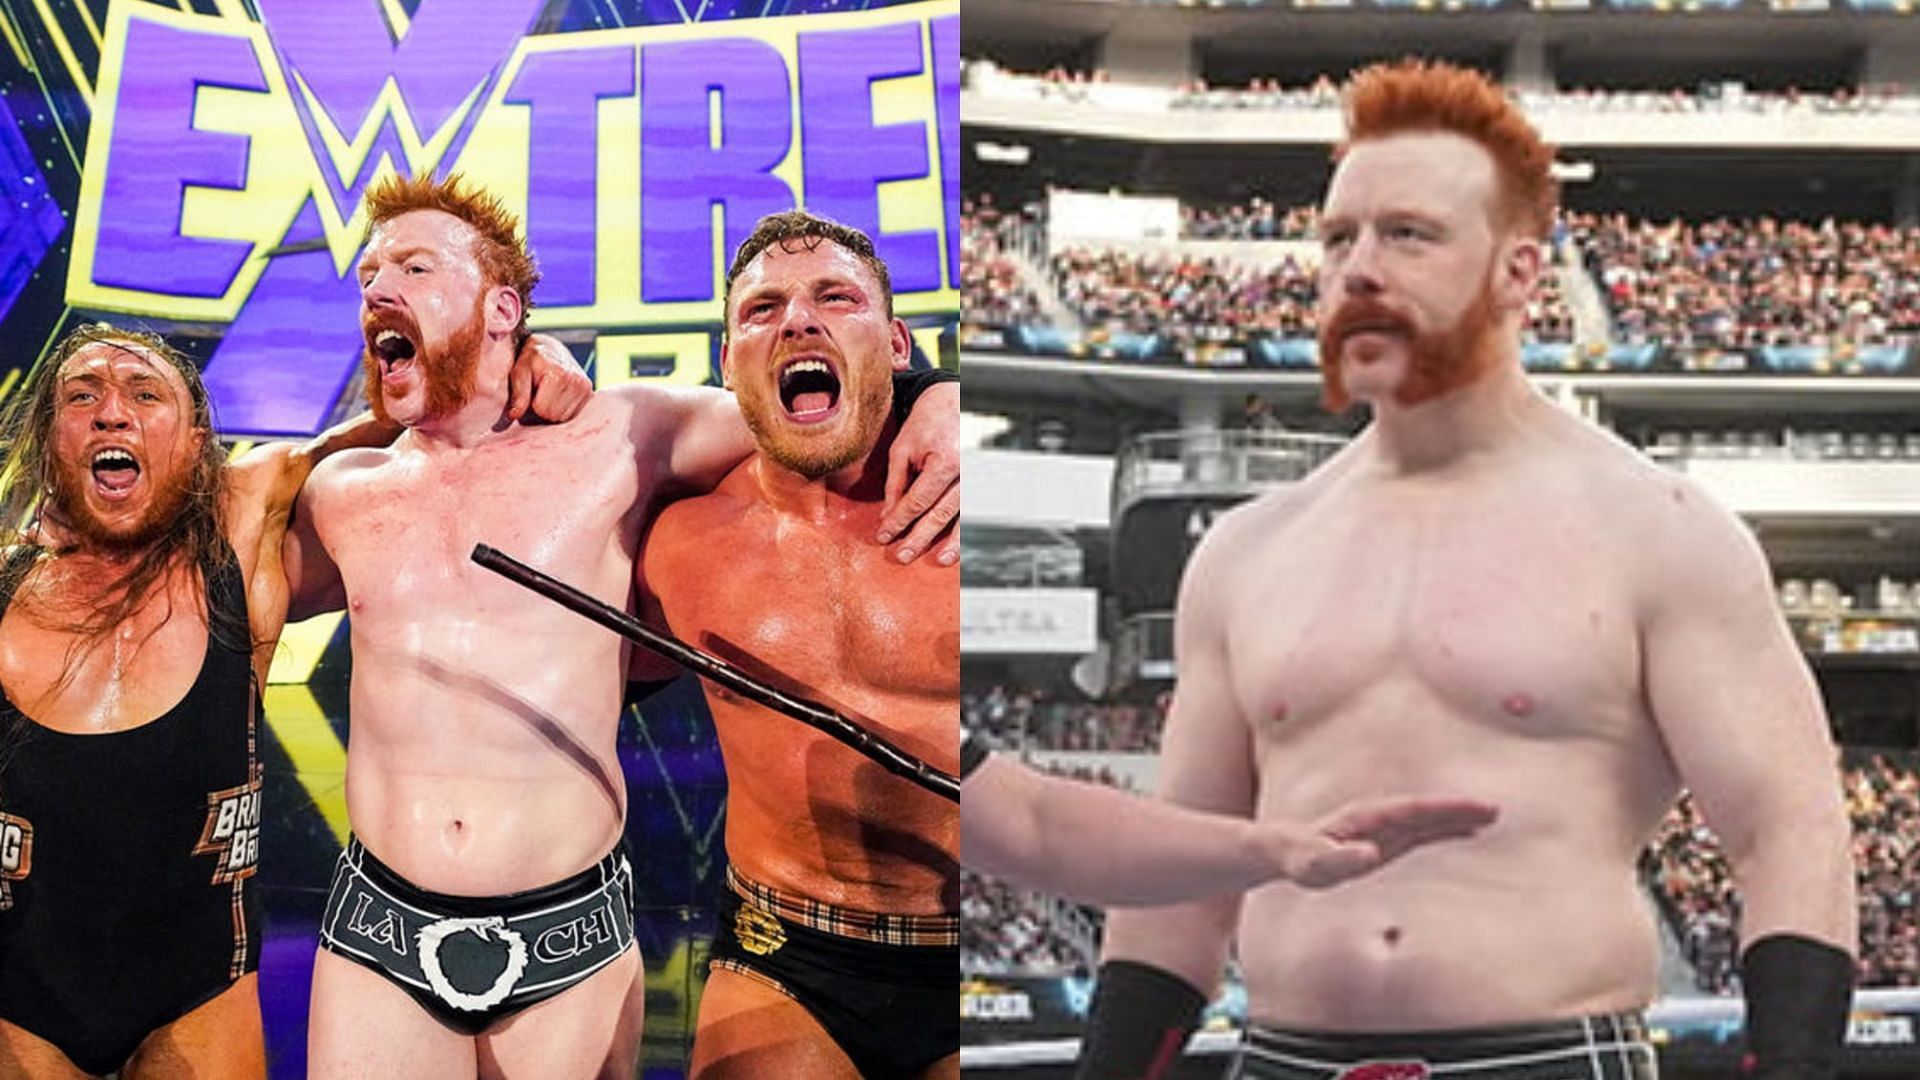 Sheamus was unsuccessful in winning the US Championship